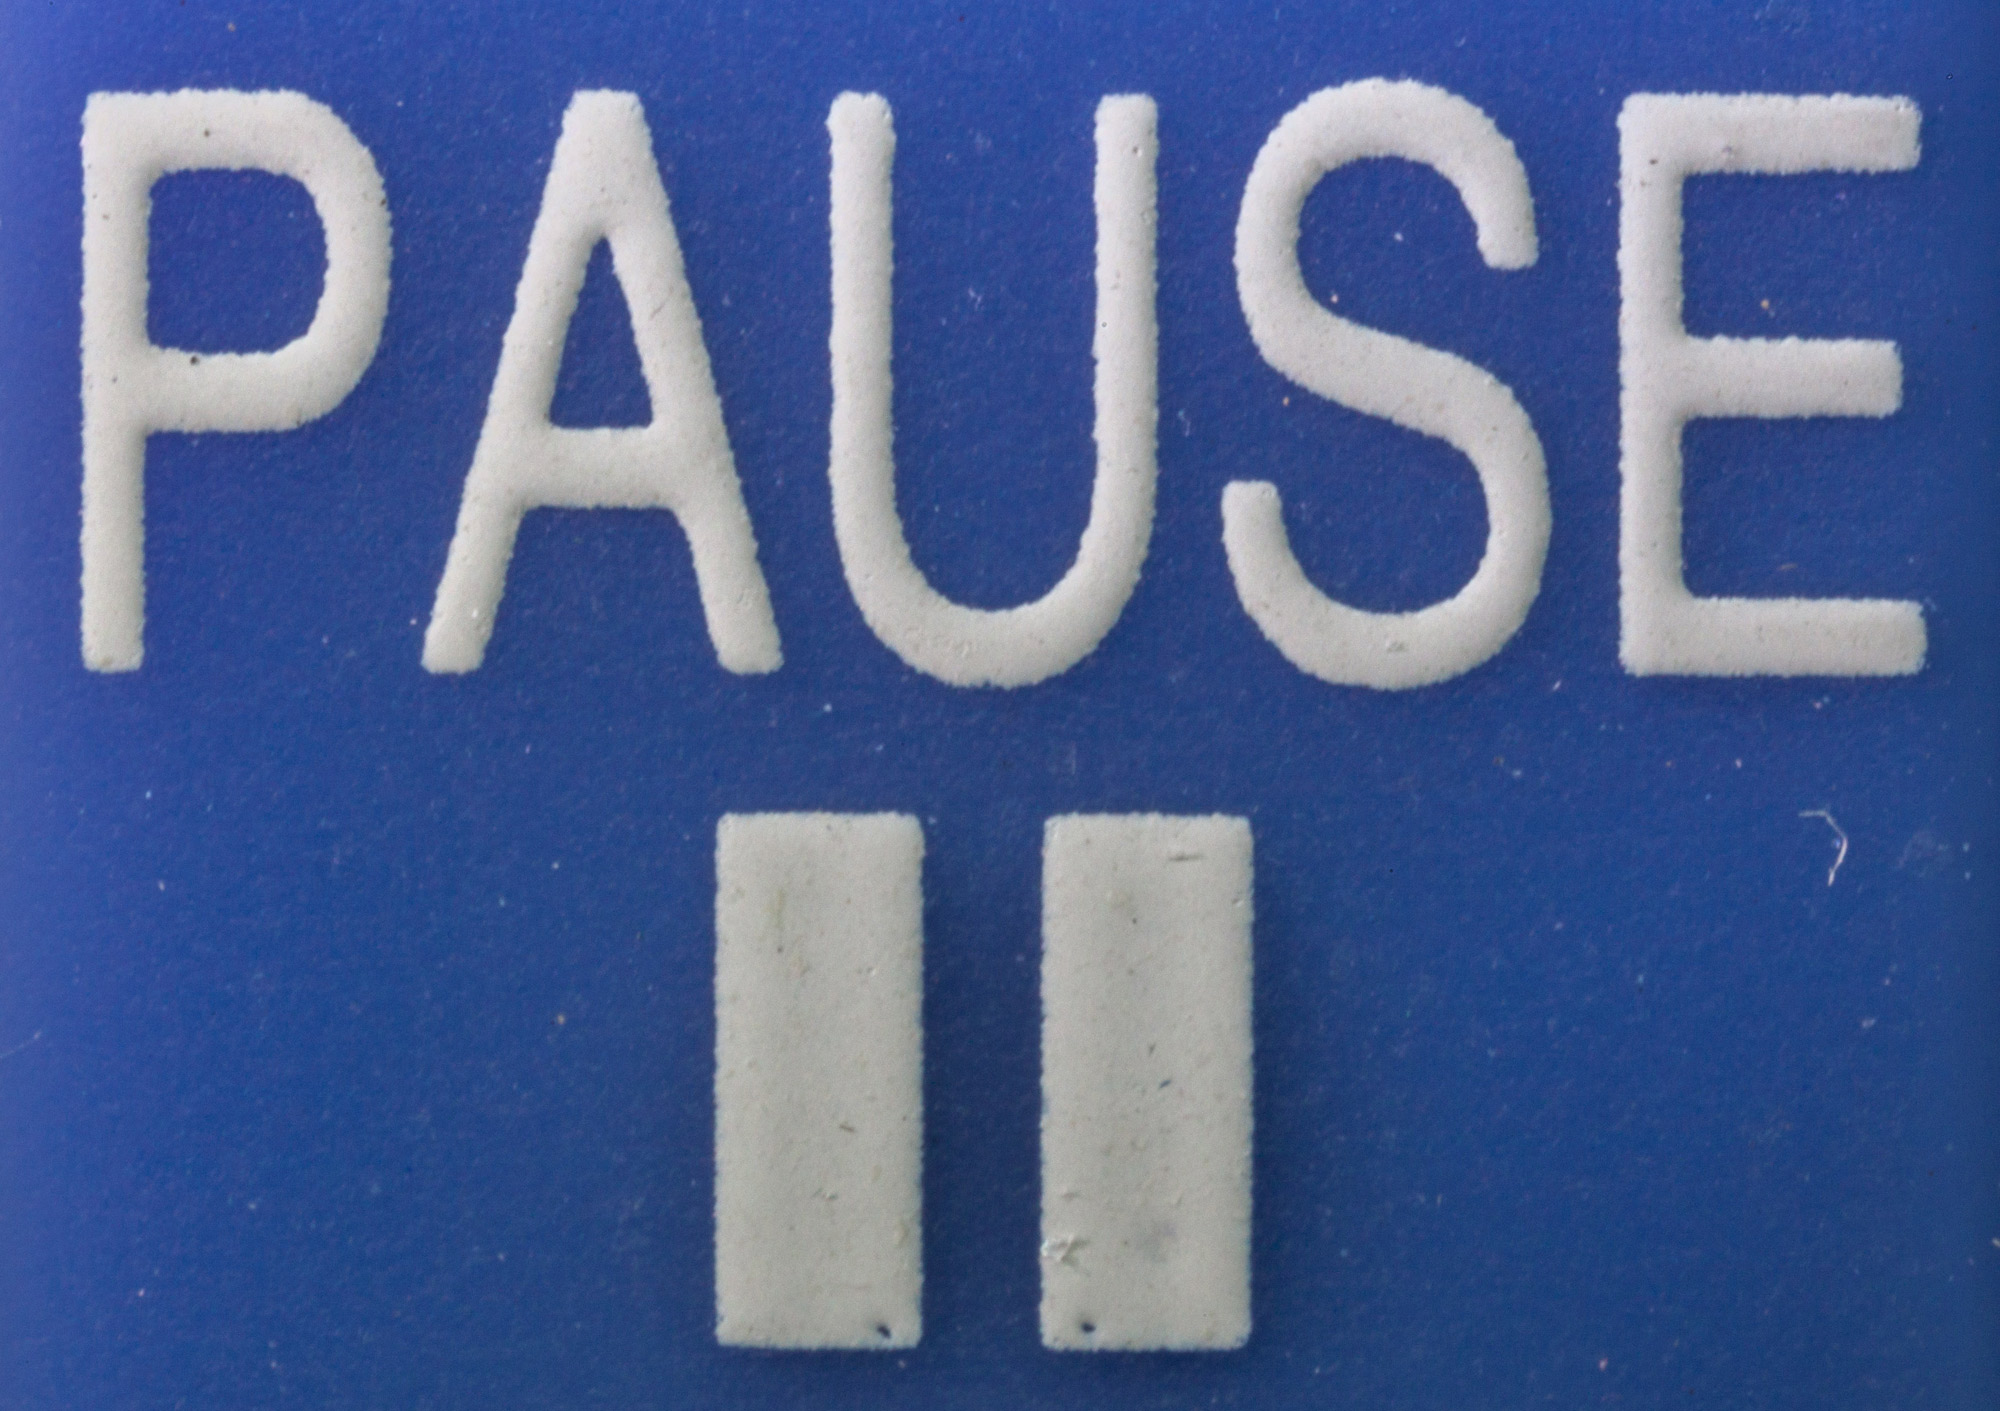 PAUSE-button_-_Macro_photography_of_a_remote_control